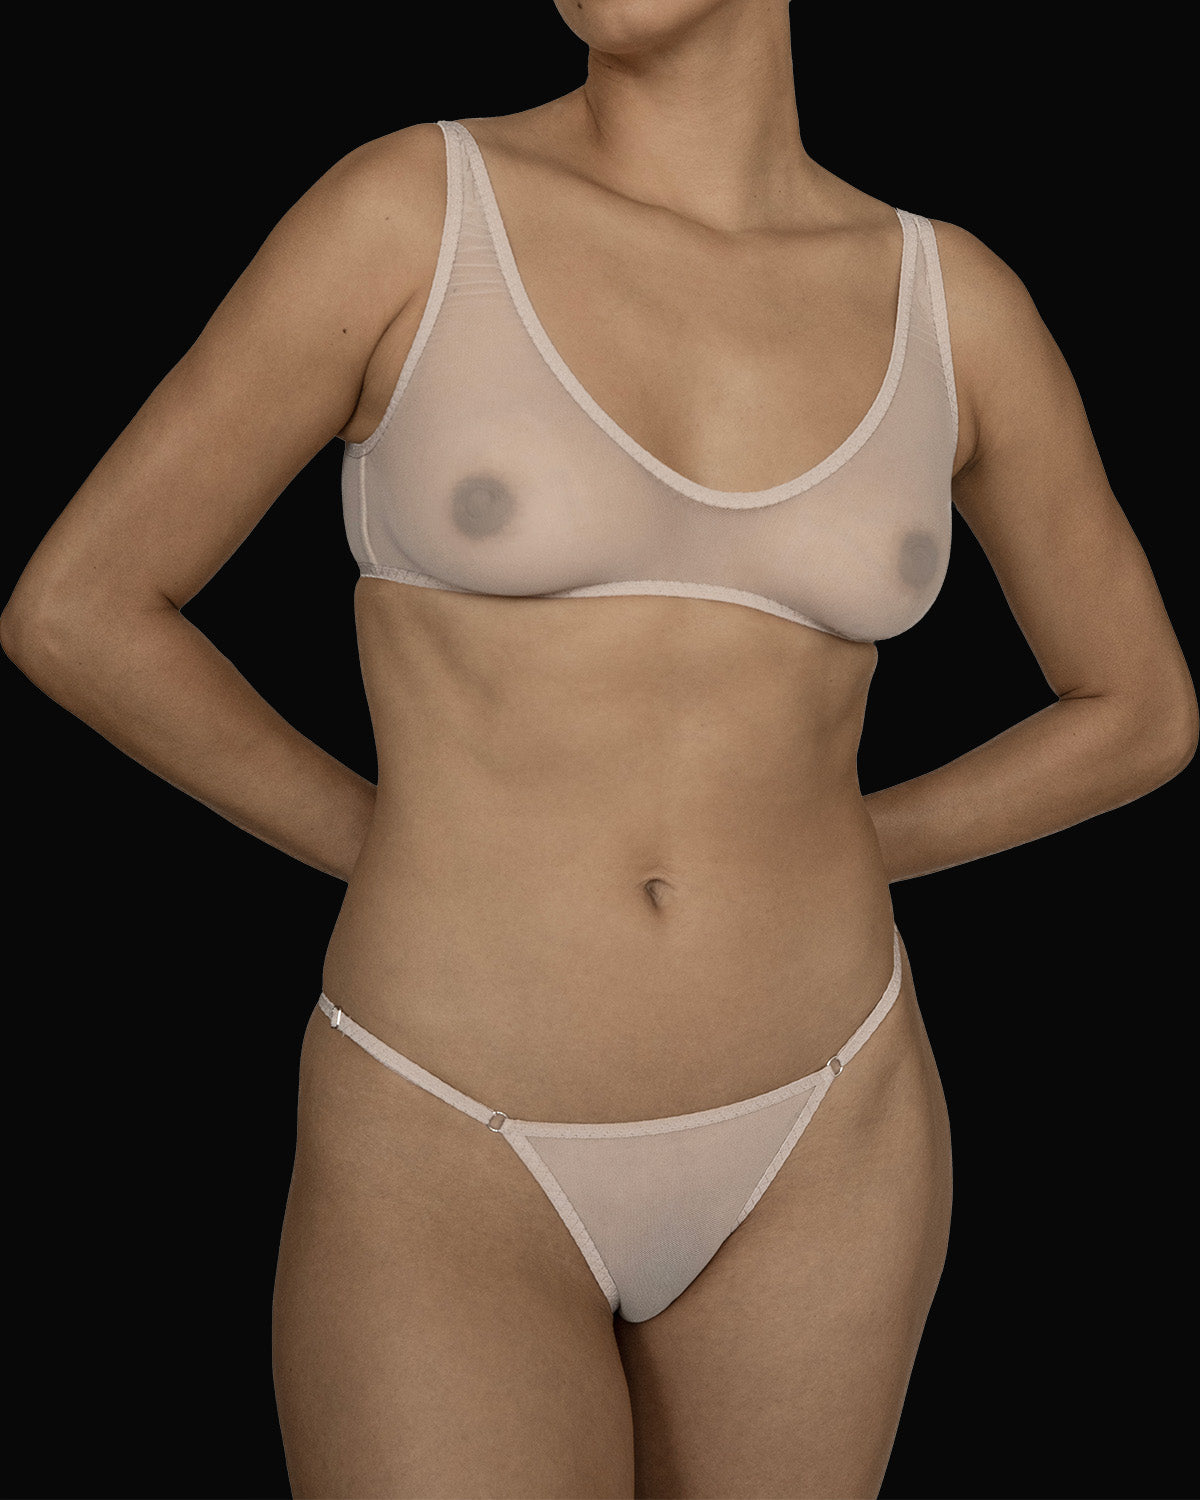 The Kye Intimates Ikebana Bra in the color ecru. A deep scoop neck bra with wide adjustable shoulder straps and an adjustable back clasp. This sheer bra is both dainty and sensual.